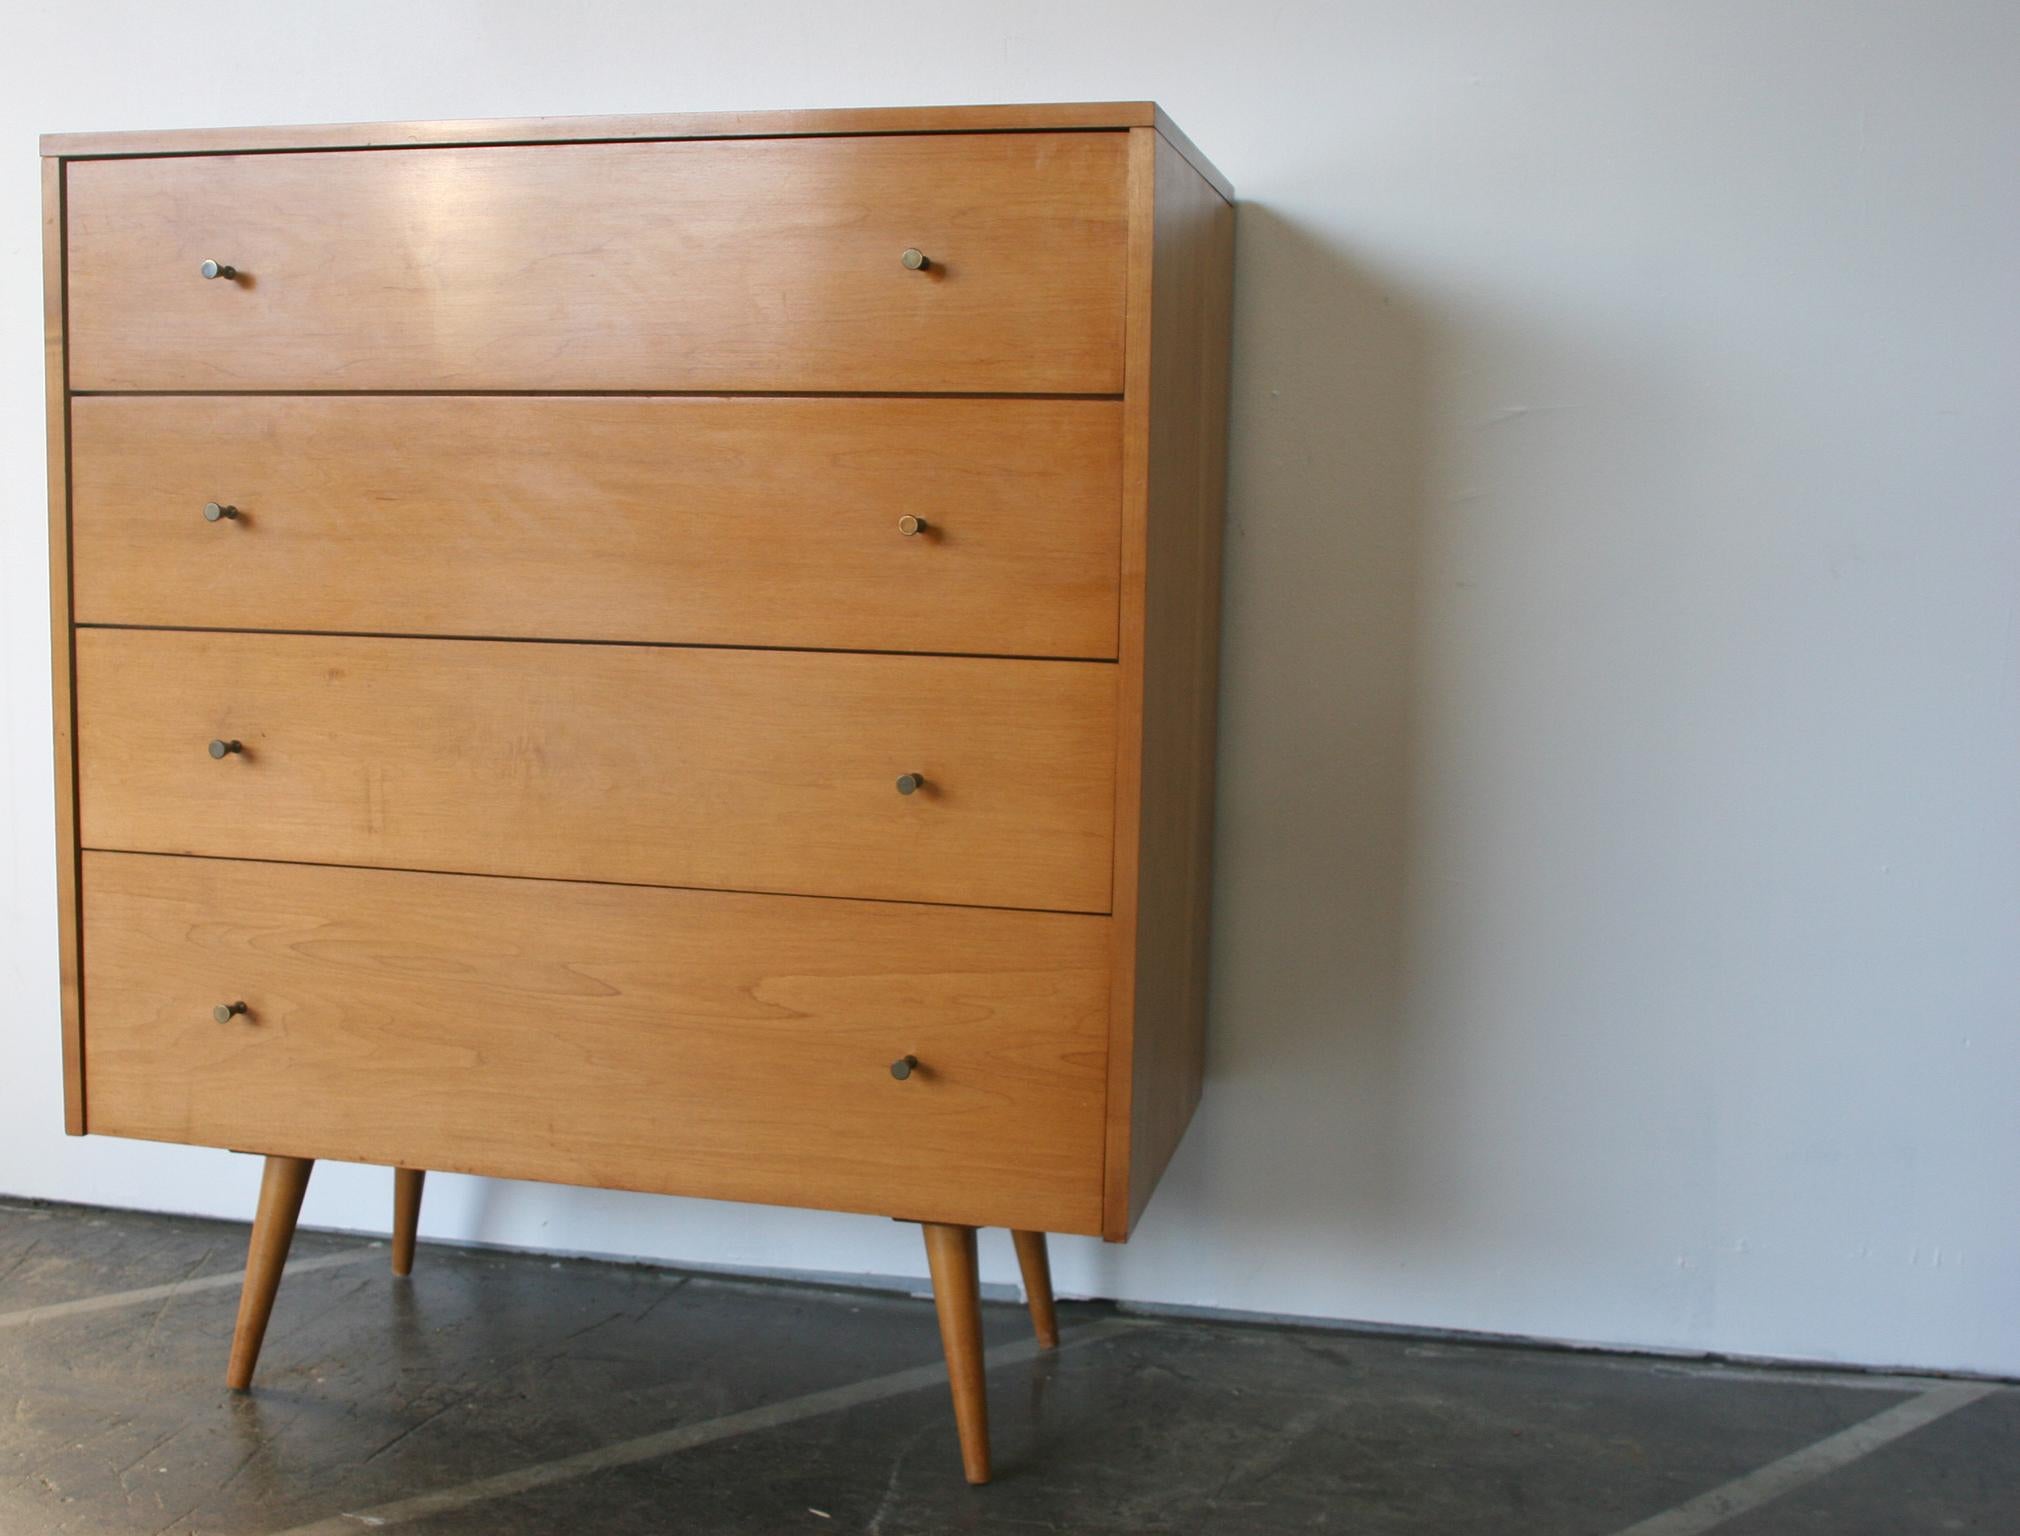 Beautiful midcentury tall dresser 4-drawer dresser by Paul McCobb circa 1950 Planner Group #1501 with 4 center drawers. Solid maple construction has a Beautiful Blonde Lacquered finish. All original Brass Cone pulls sits on 4 Solid Maple Tapered